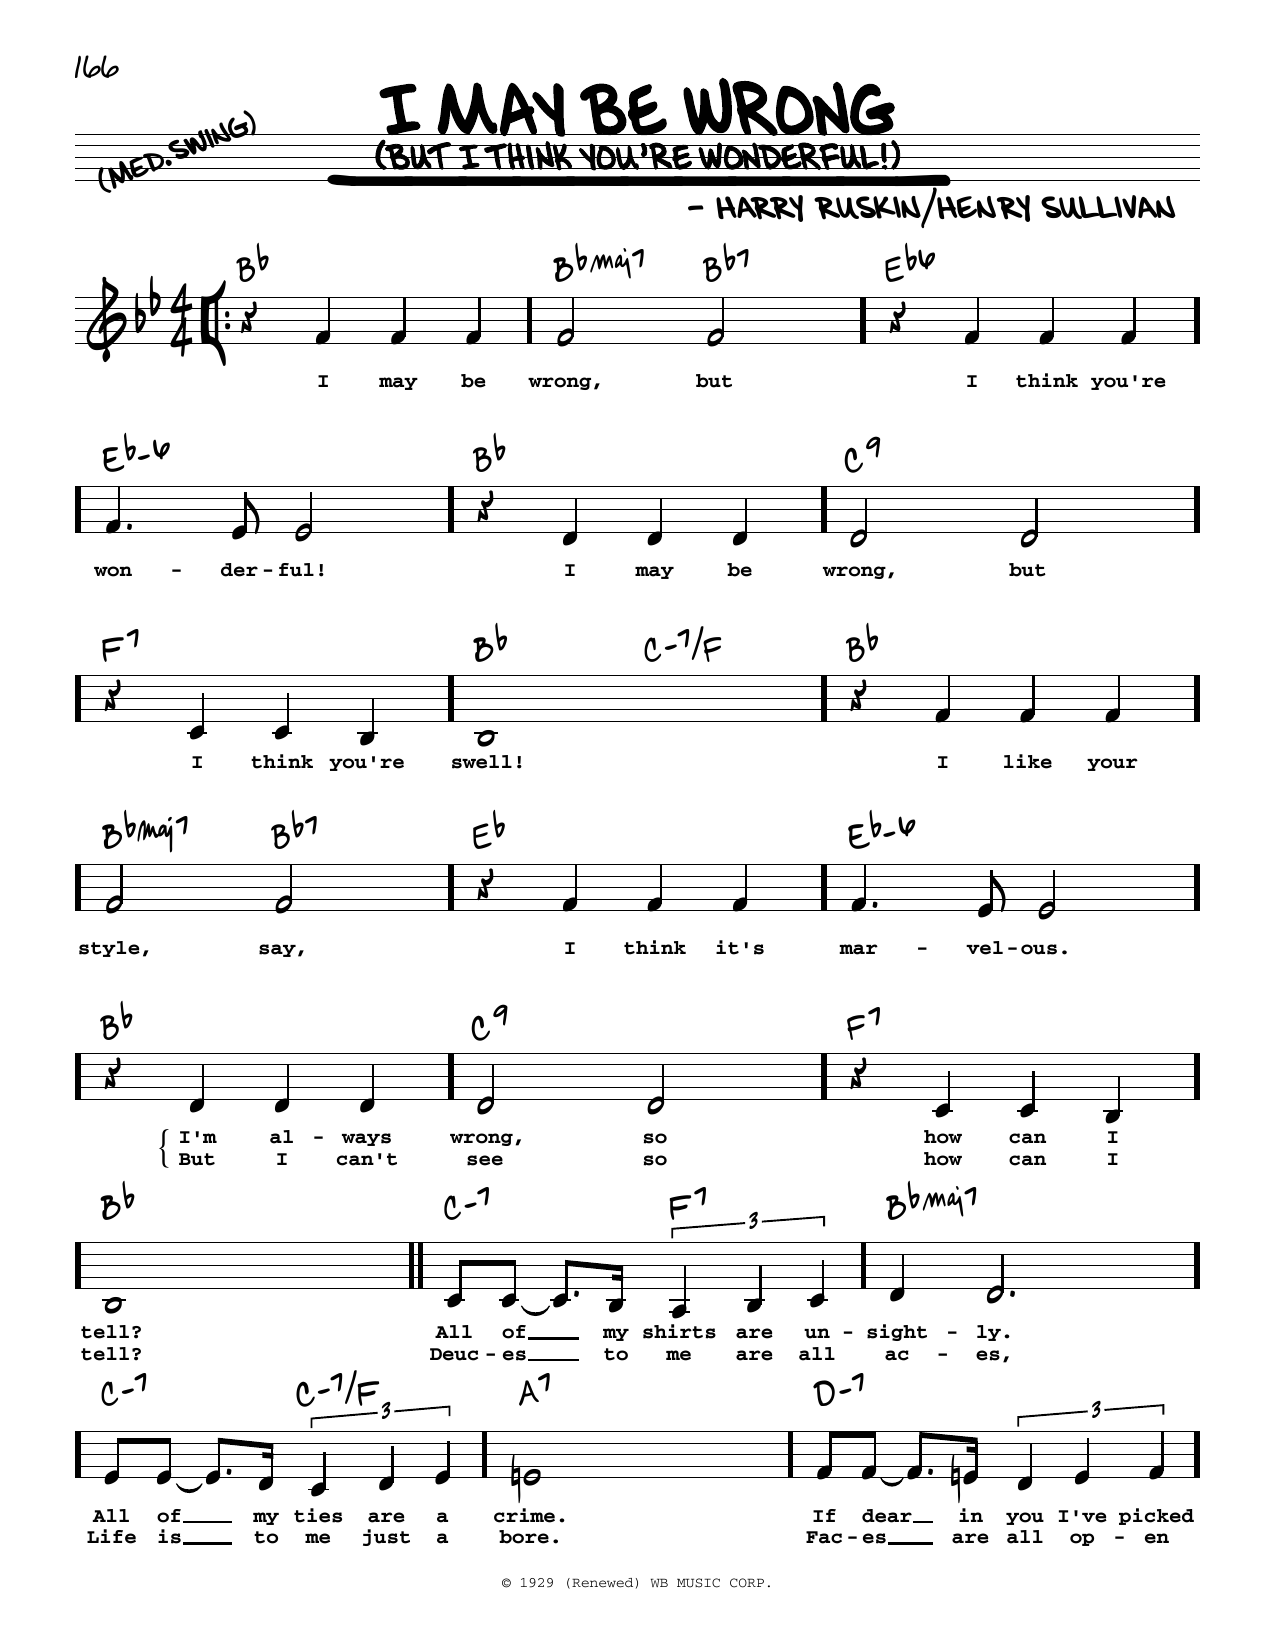 Download Henry Sullivan I May Be Wrong (But I Think You're Wond Sheet Music